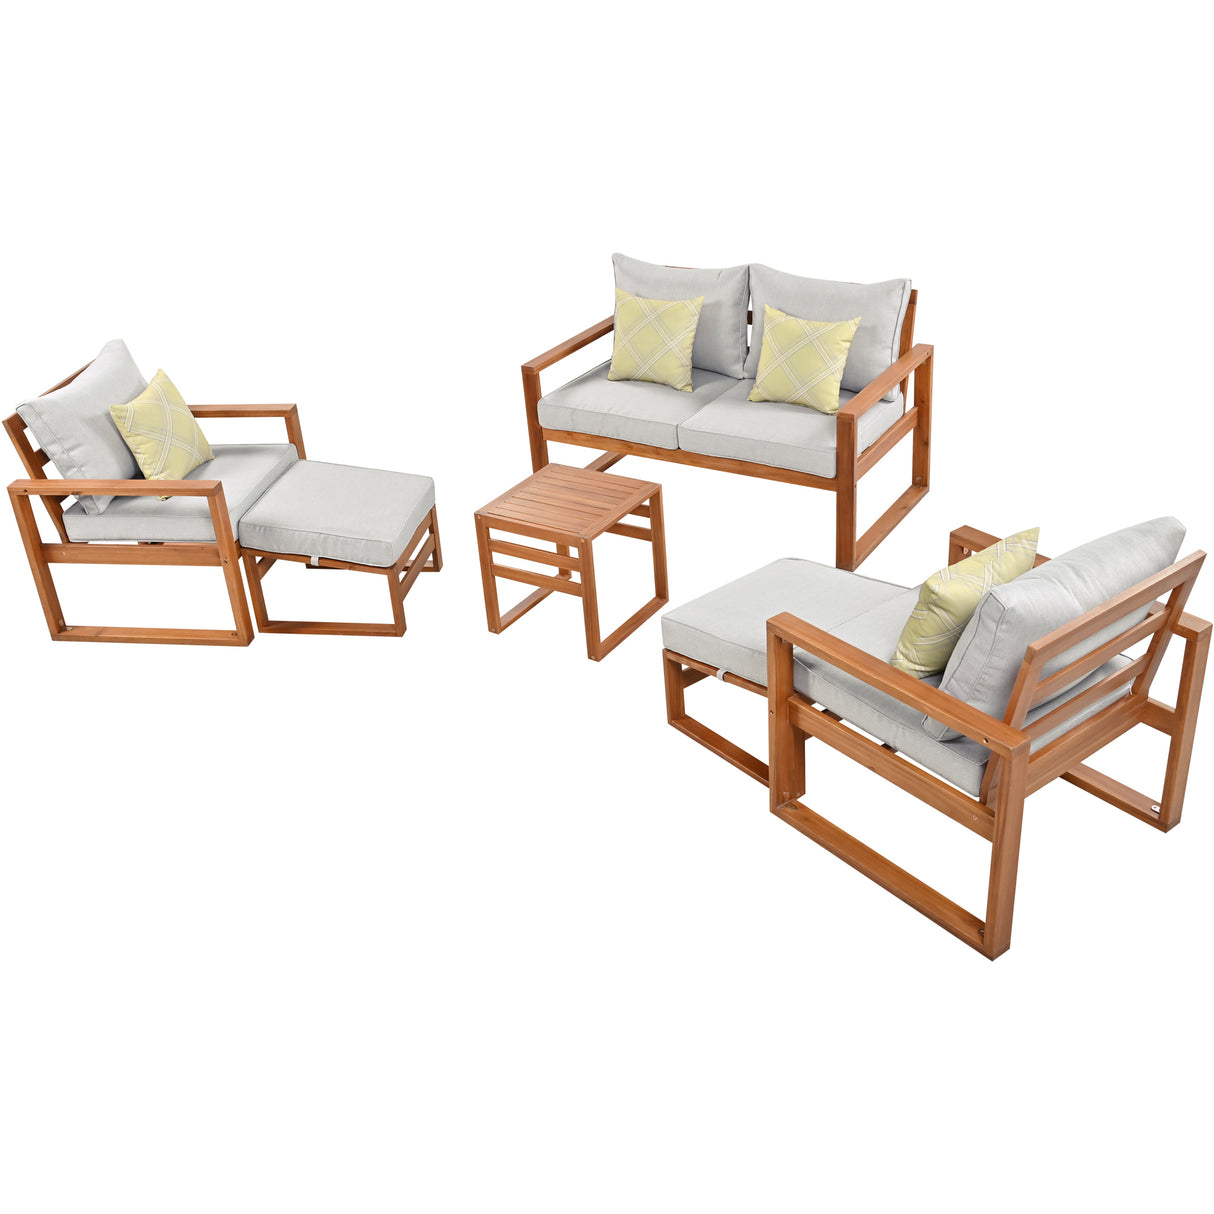 TOPMAX Outdoor Patio Wood 6-Piece Conversation Set, Sectional Garden Seating Groups Chat Set with Ottomans and Cushions for Backyard, Poolside, Balcony, Grey - Home Elegance USA